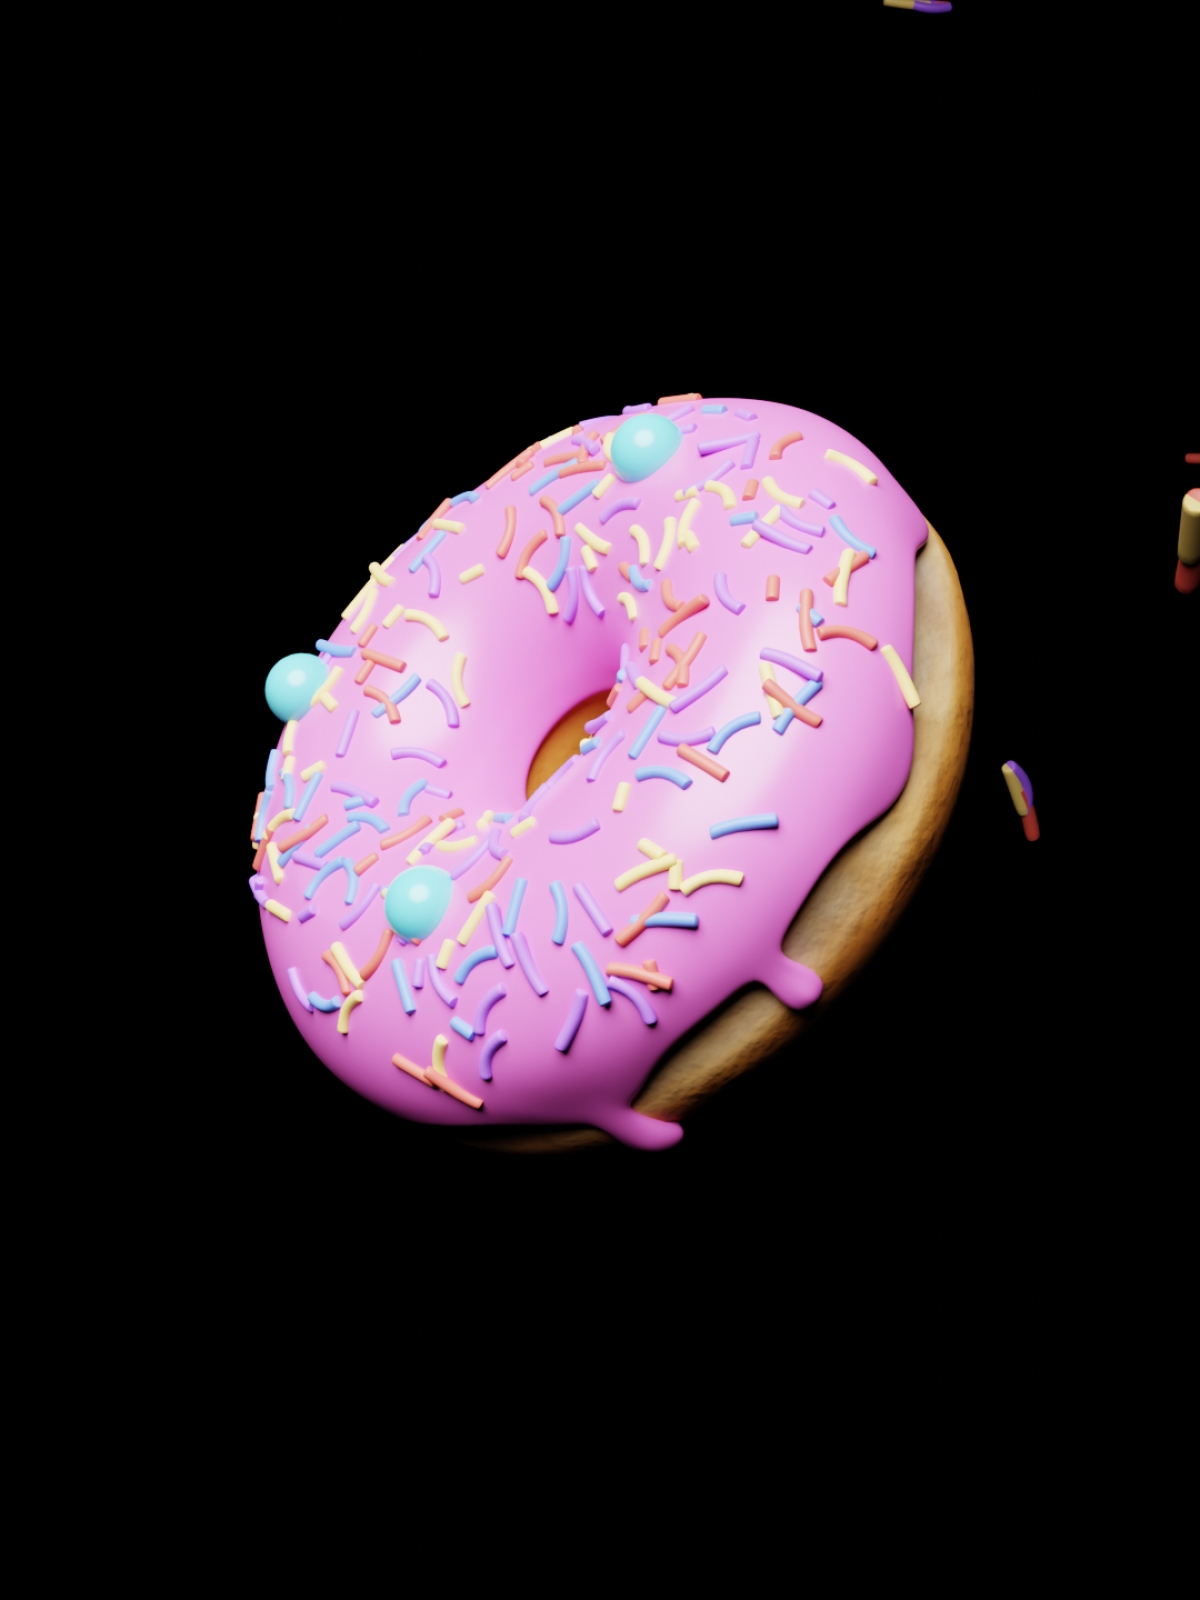 3d Donut  wallpaper for Apple iPhone, Mac, iPad and more